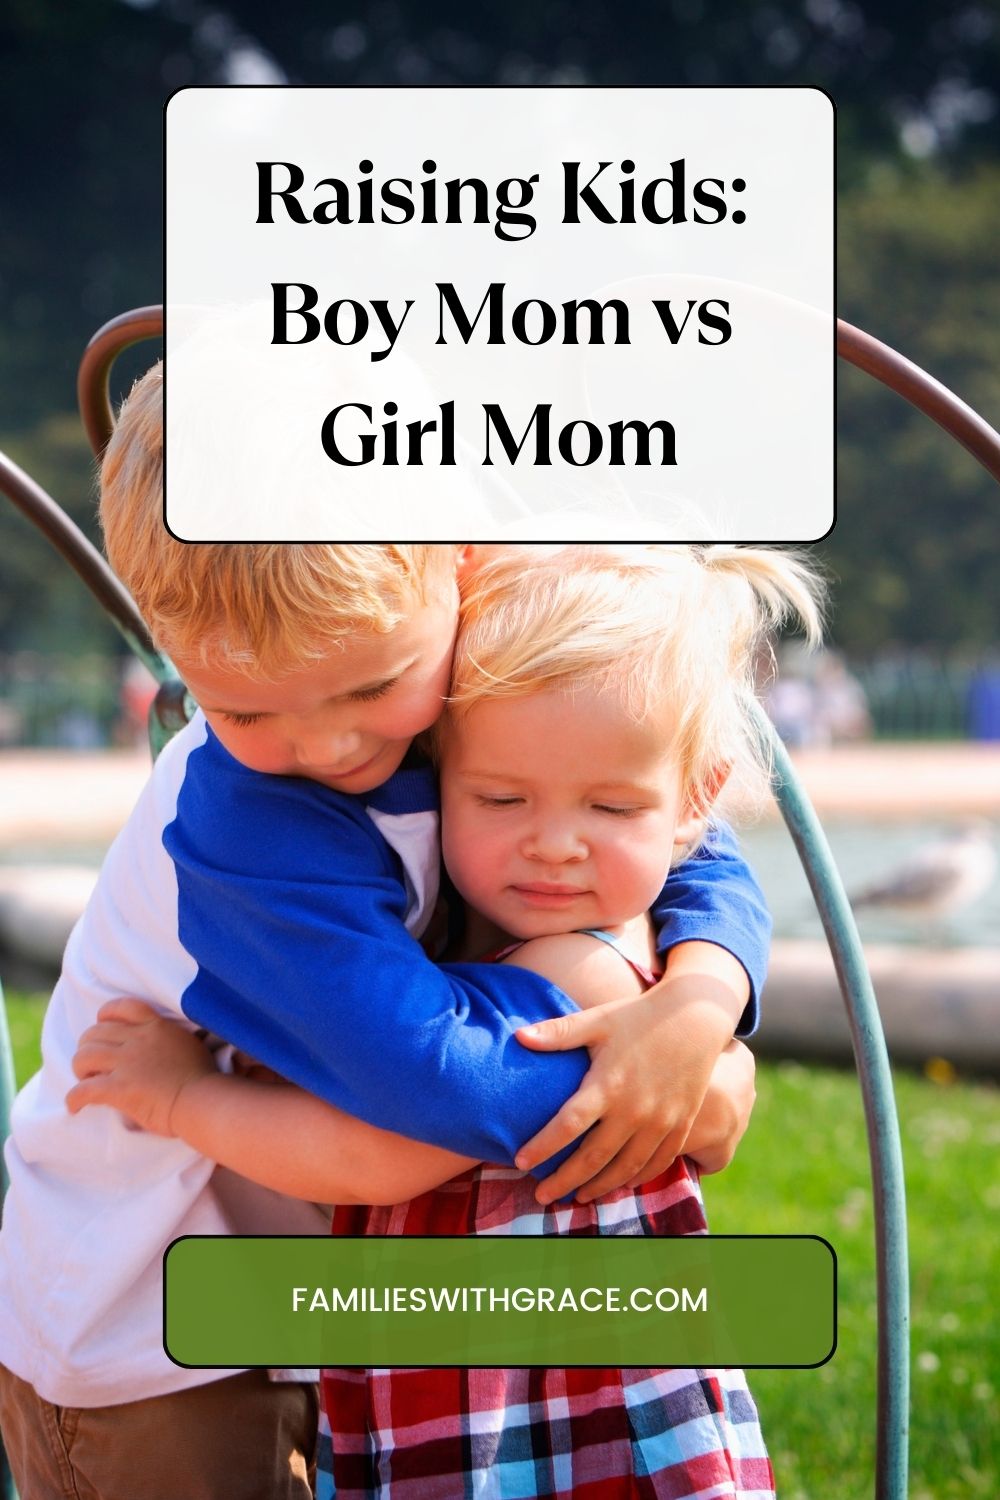 Boy mom vs girl mom: How they\'re different and the same